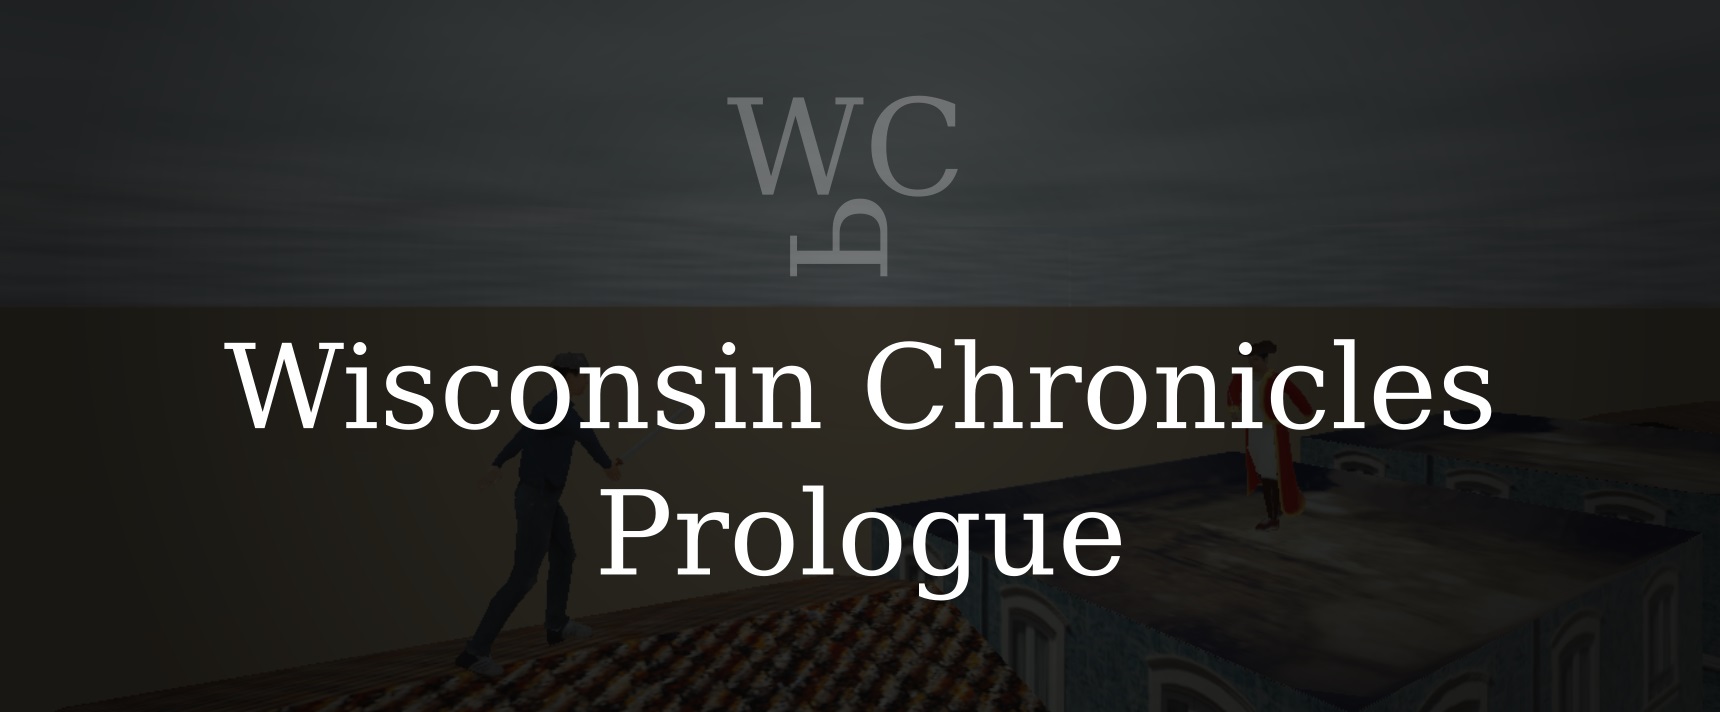 Wisconsin Chronicles Prologue